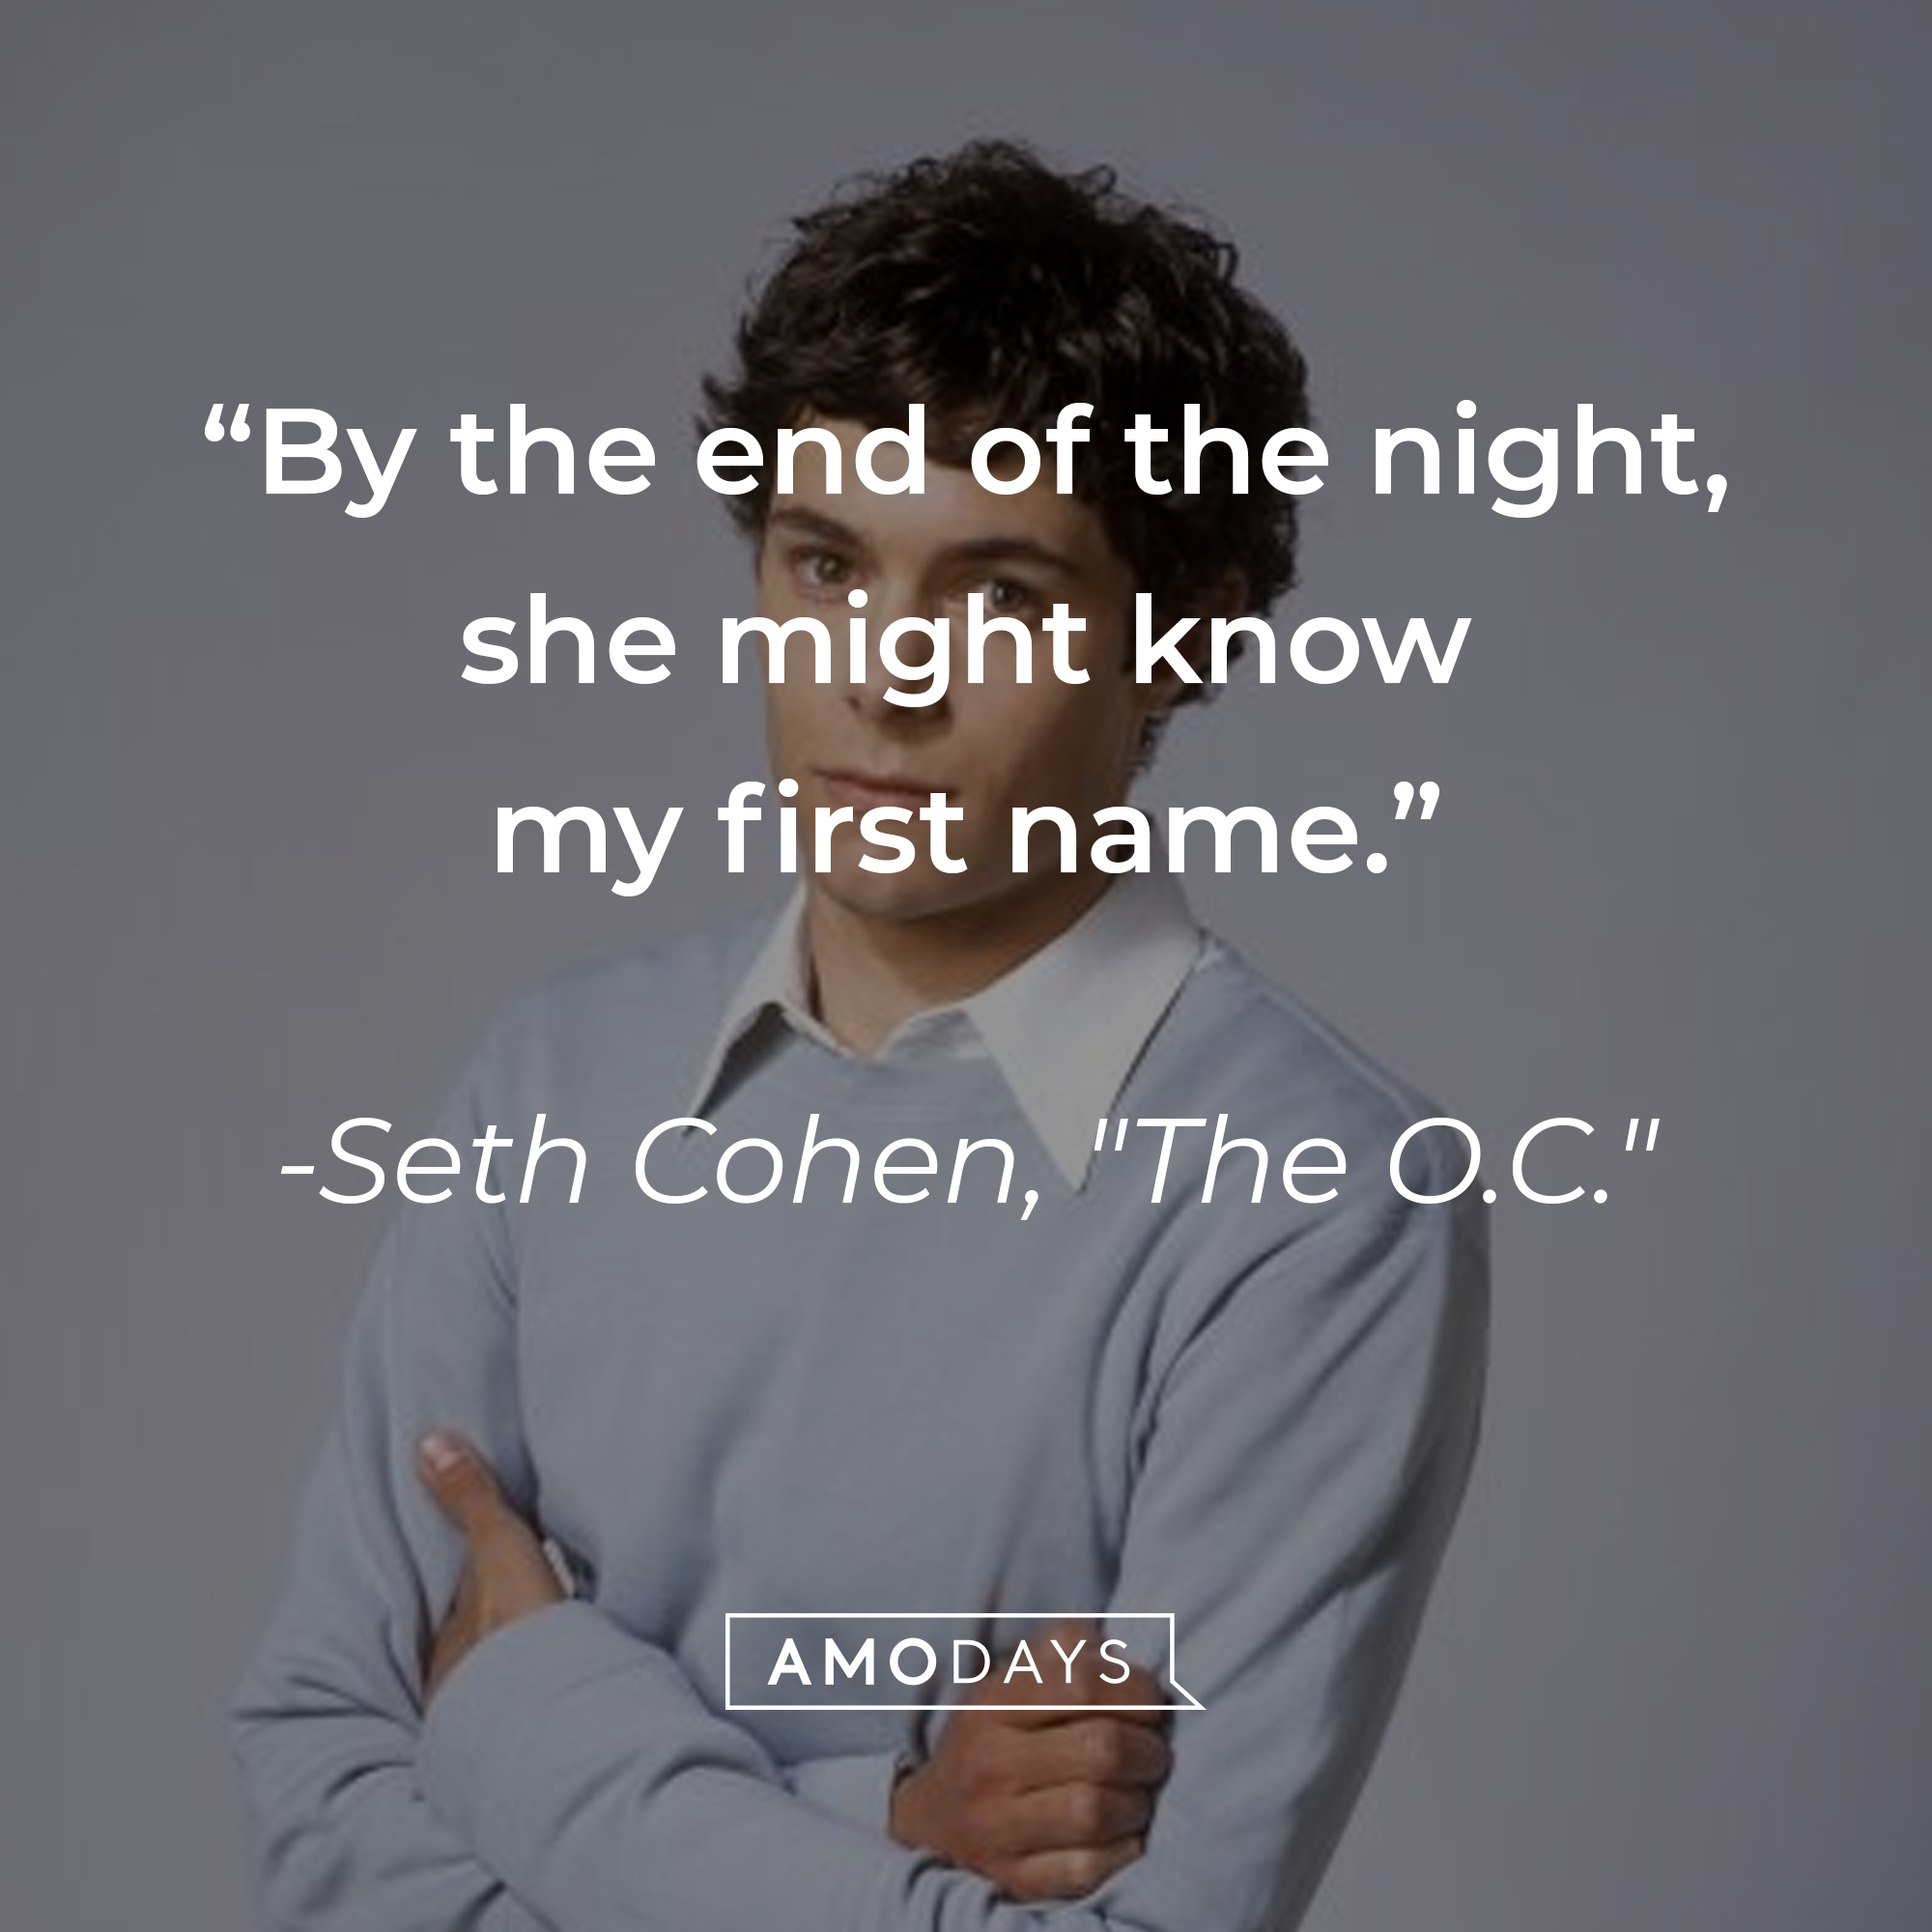 Seth Cohen's quote: "By the end of the night, she might know my first name." | Source: Facebook.com/TheOC